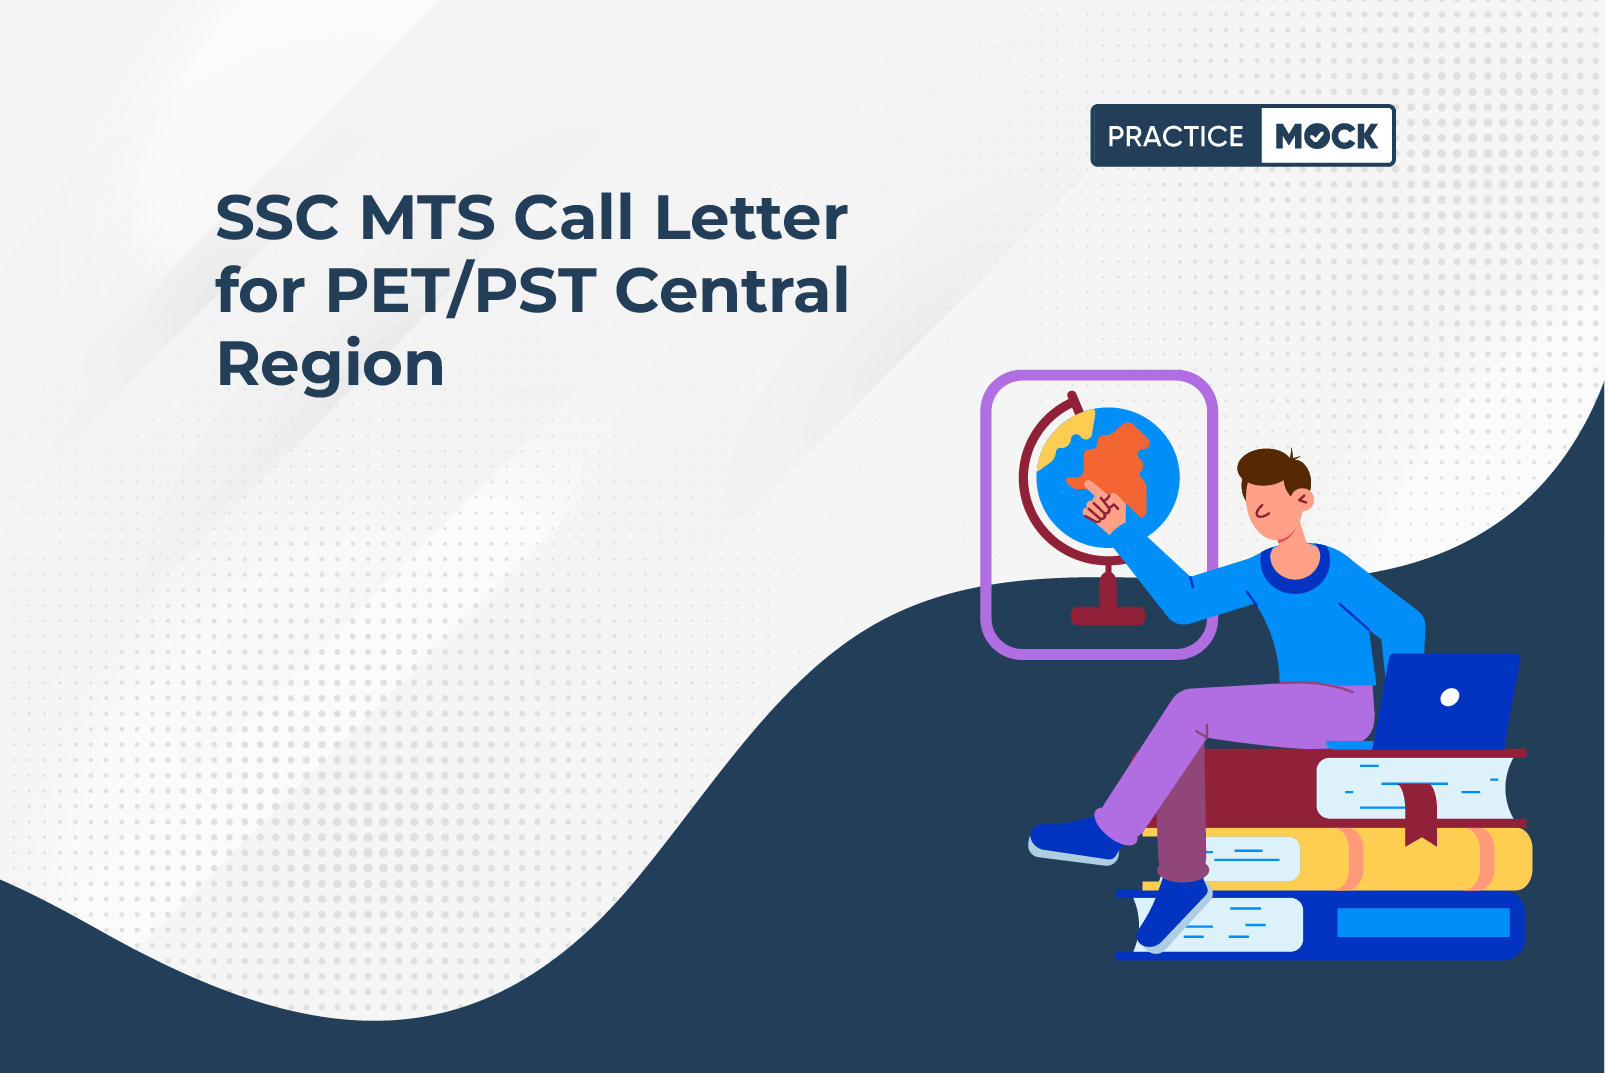 SSC MTS Call Letter for PETPST Central Region (1)